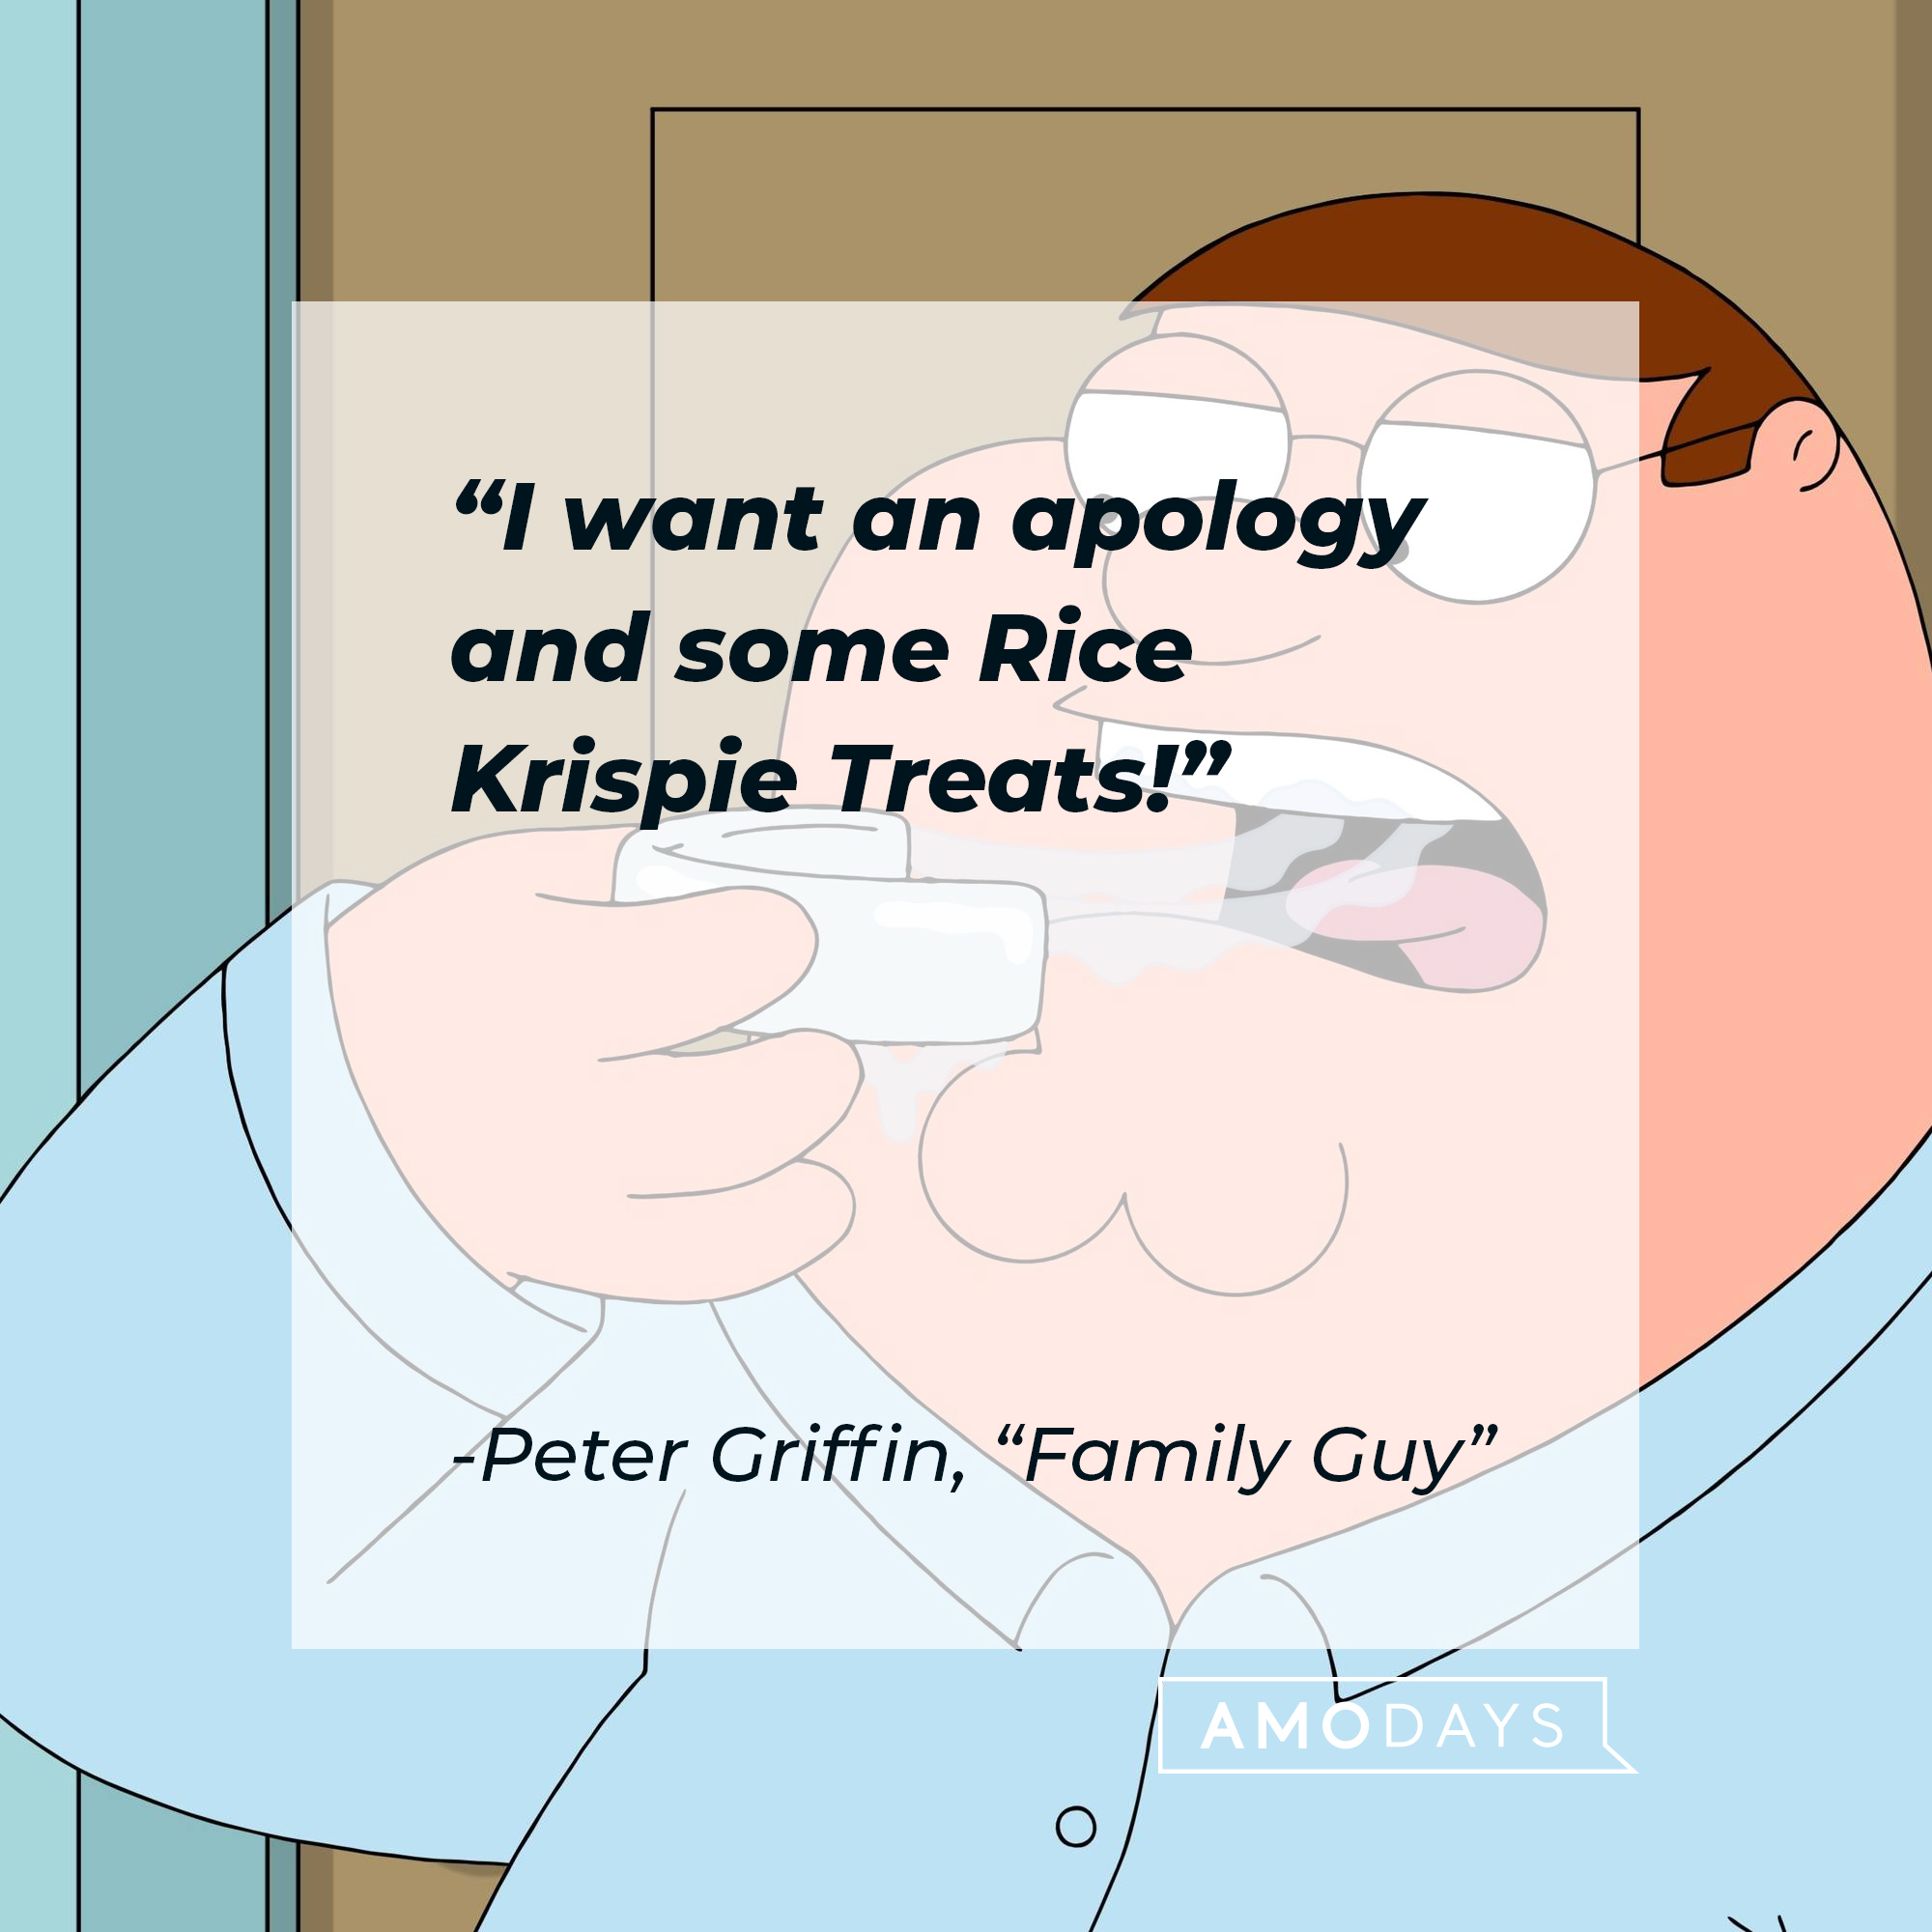 Peter Griffin's quote: "I want an apology and some Rice Krispie Treats!" | Source: facebook.com/FamilyGuy